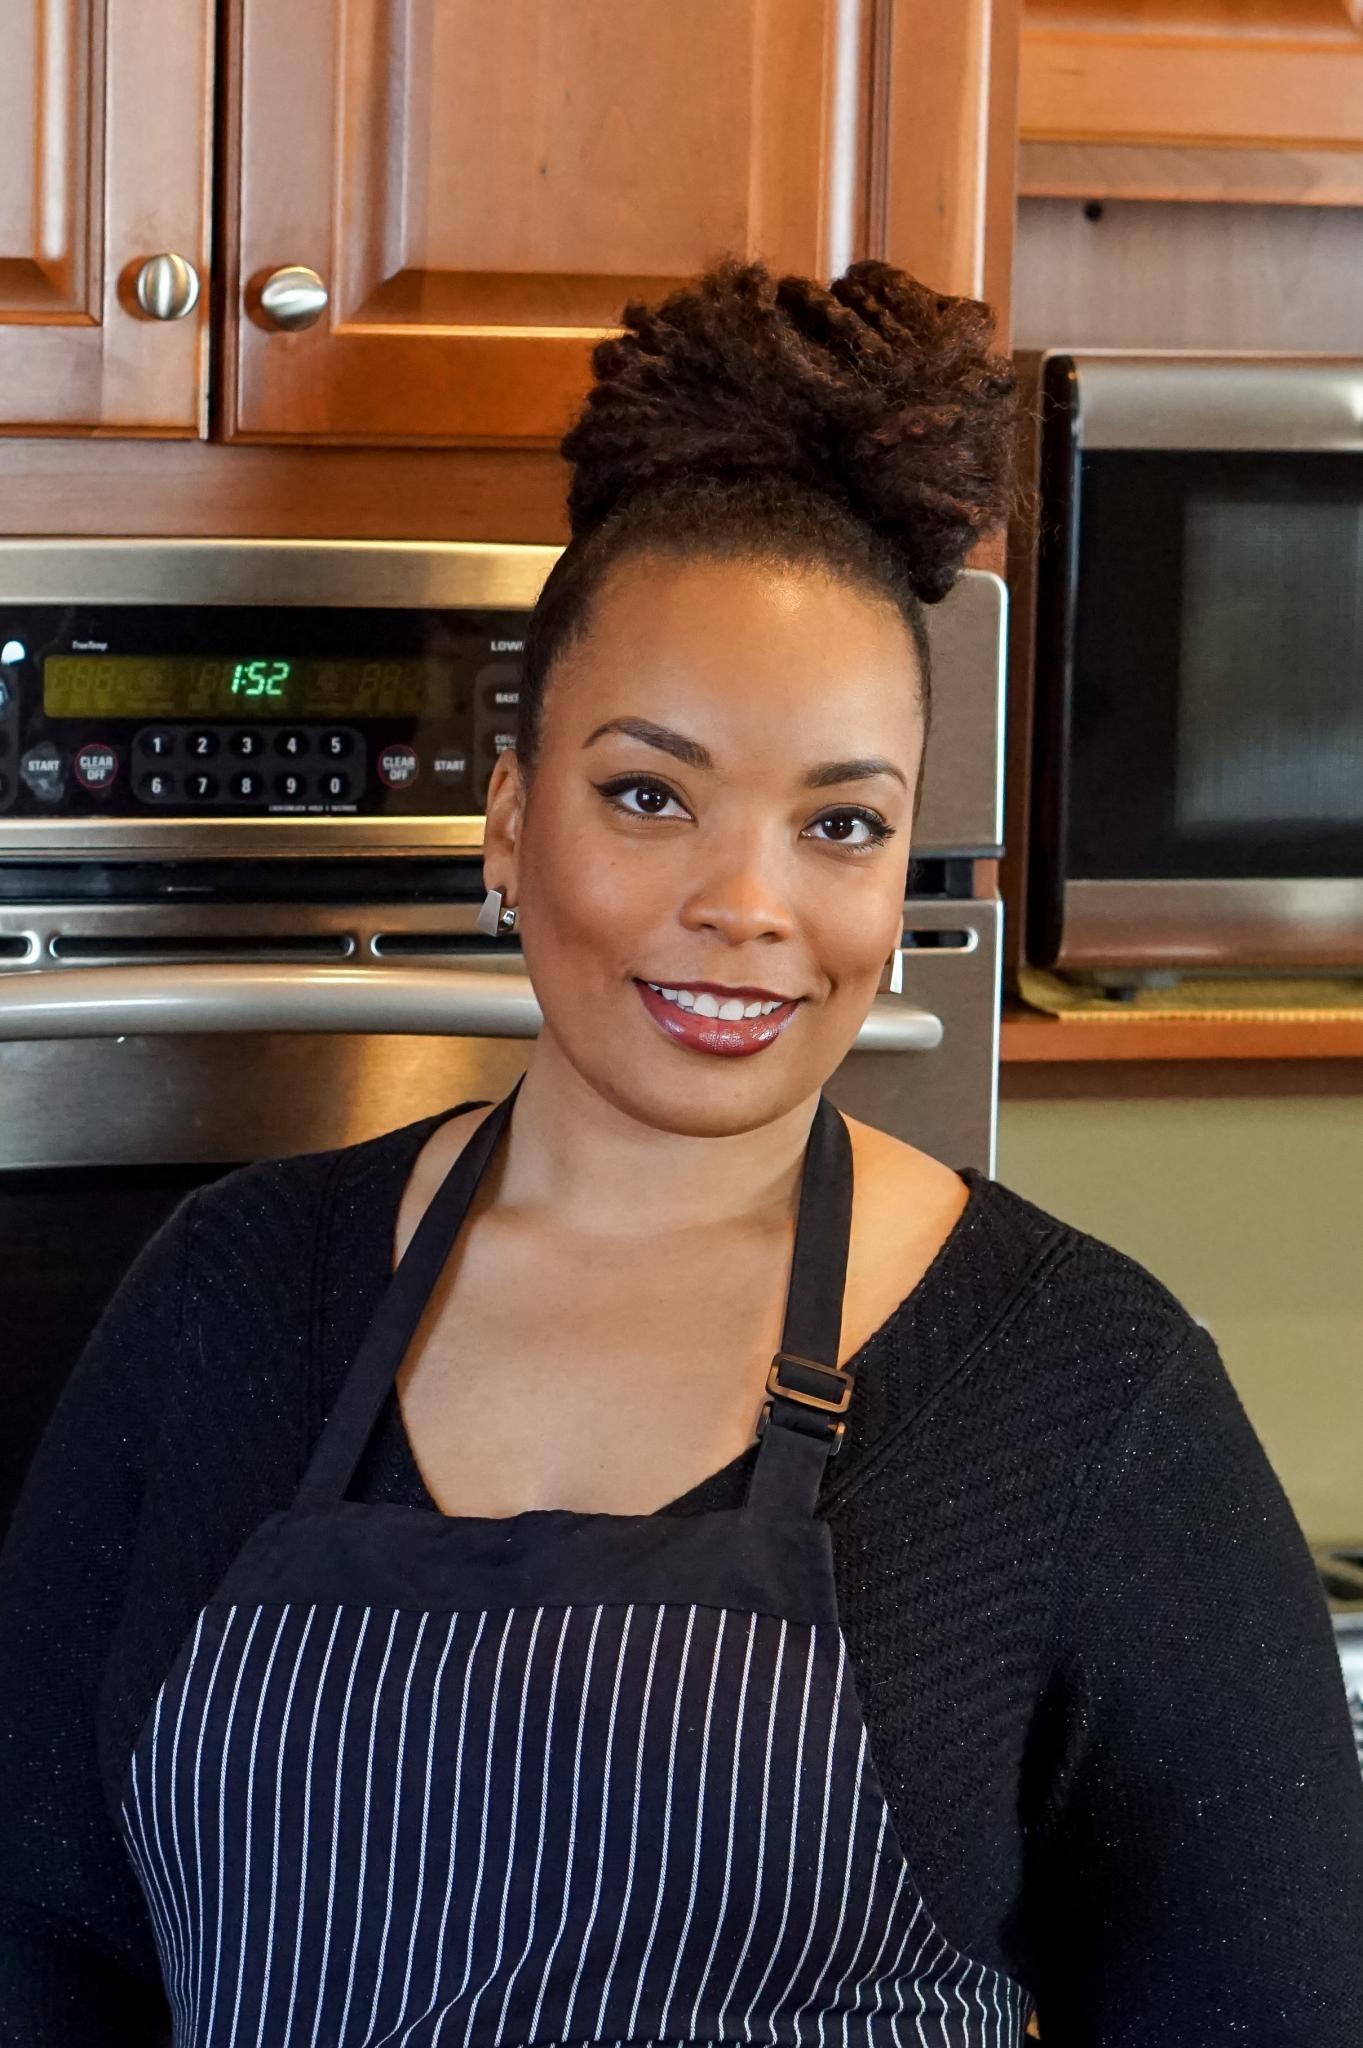 Started With a Recipe, Now She's Here: Food Blogger 'The Kitchenista' Shares Her Story